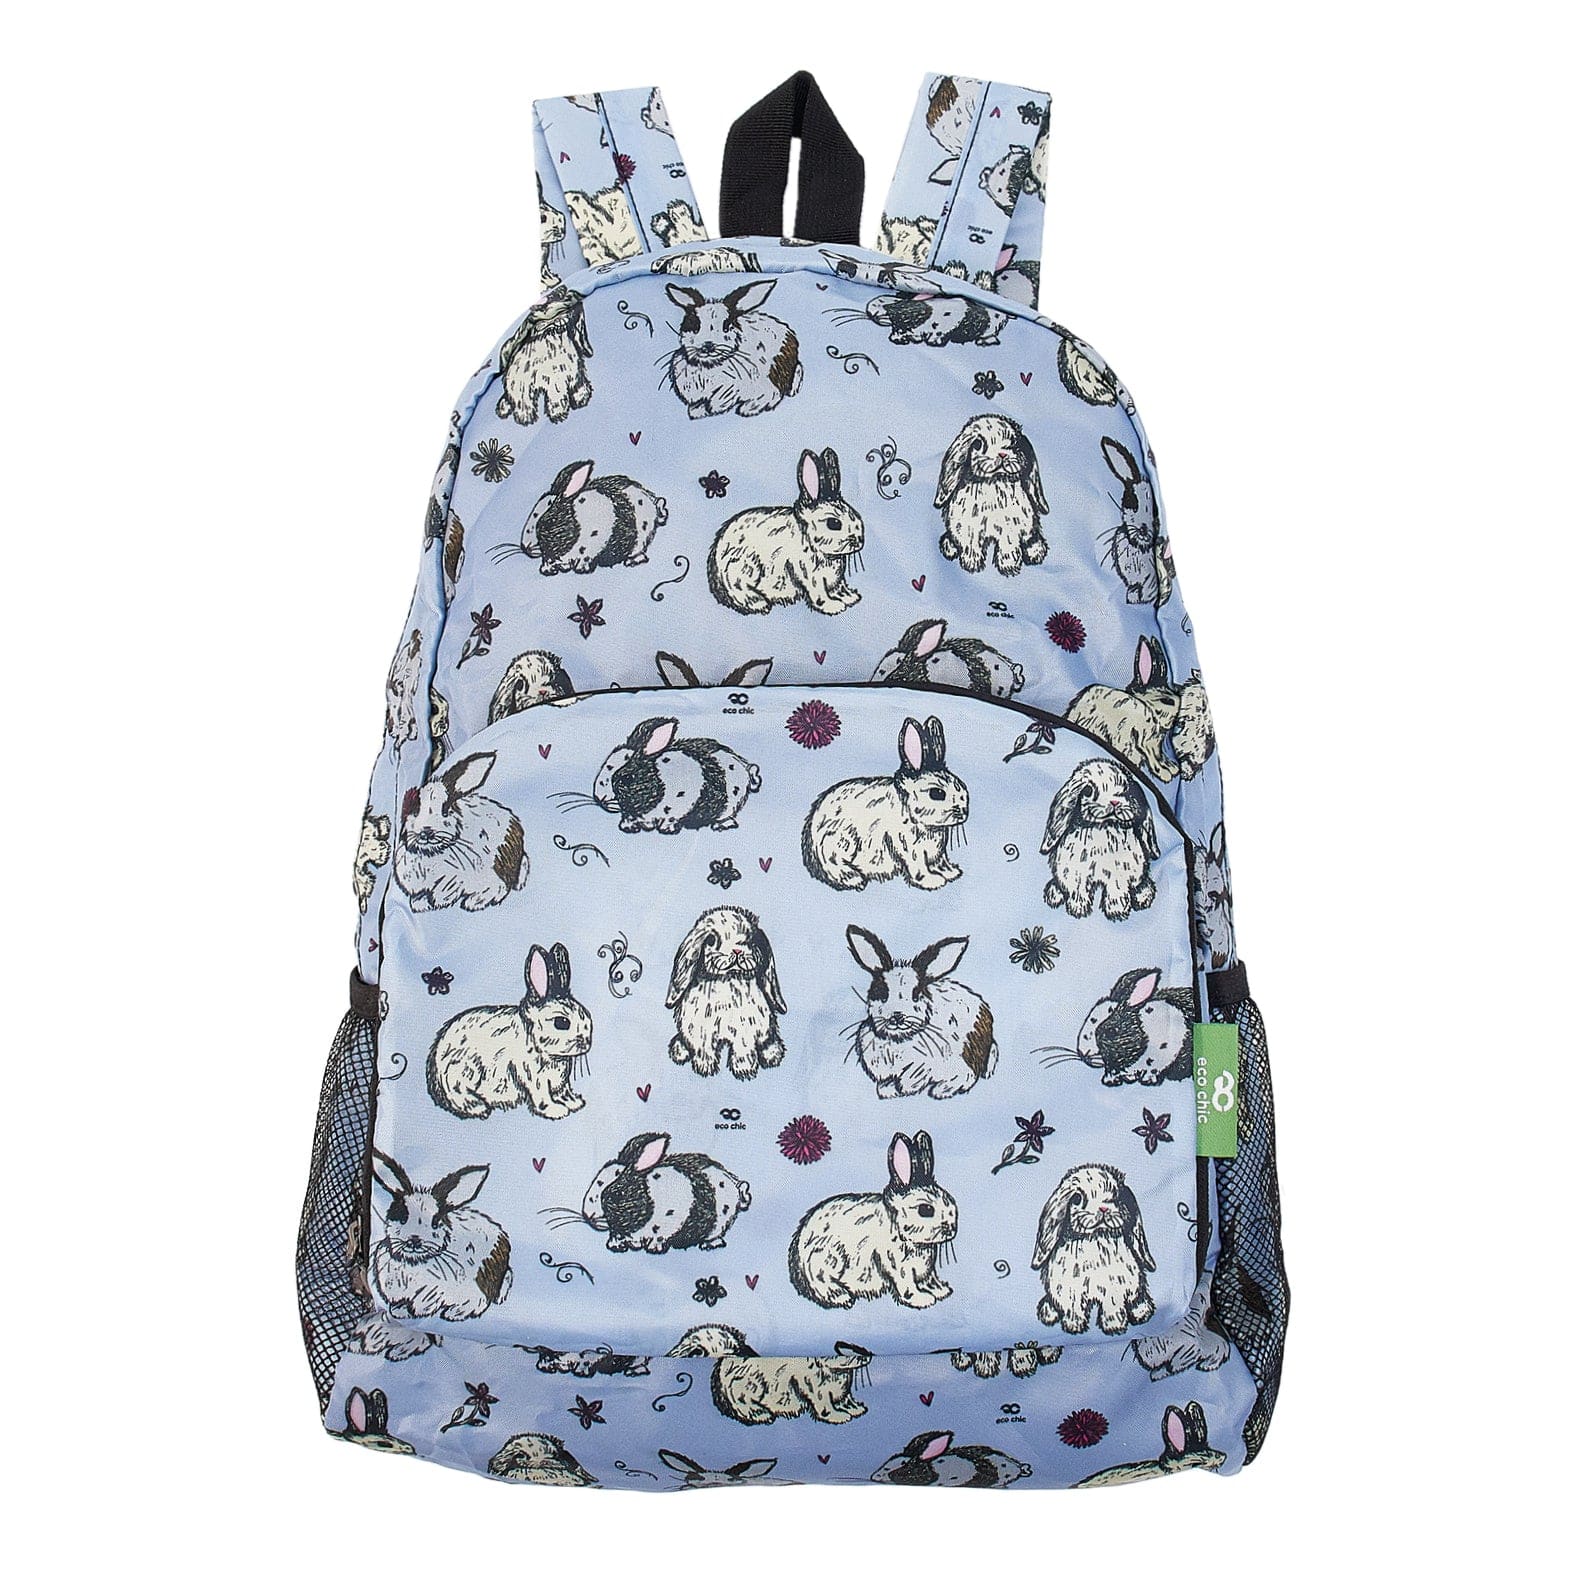 Eco Chic Baby Blue Eco Chic Lightweight Foldable Backpack Bunny